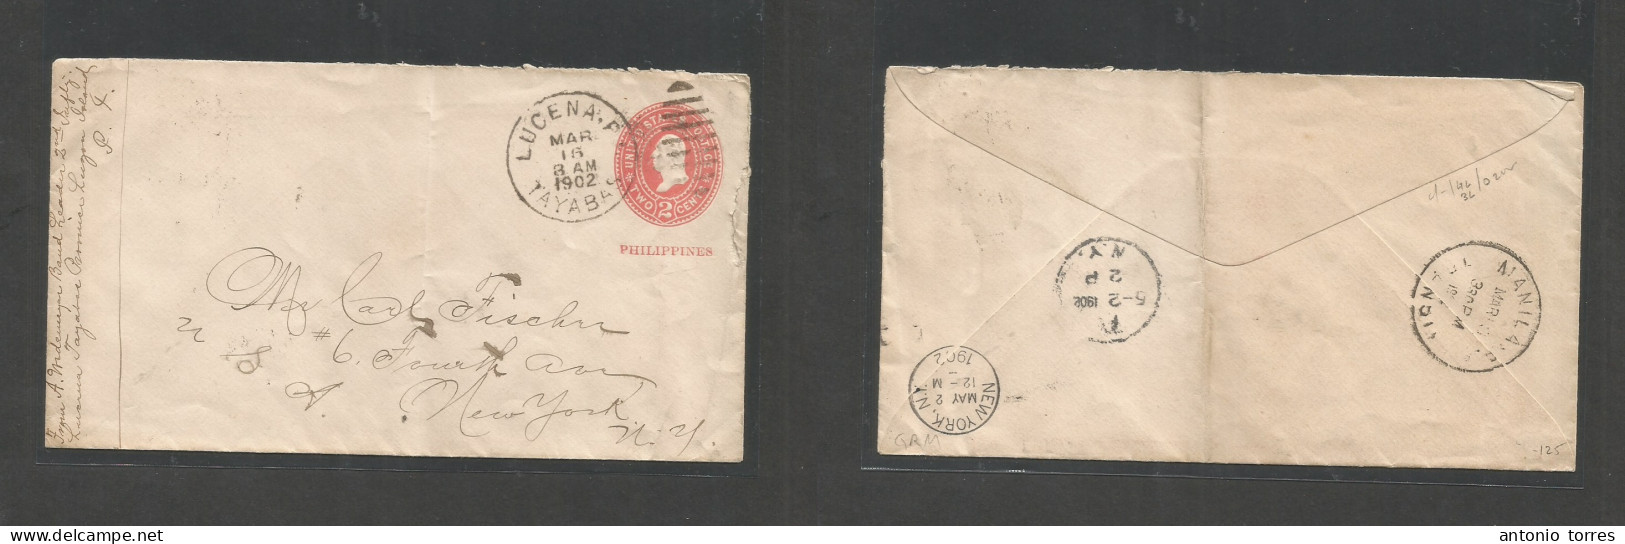 Philippines. 1902 (16 March) US Mail Admin. Lucena, Tayabas - USA, NYC (2 May) US 2c Red Ovptd Stat Env Cds. Scarce Orig - Philippines